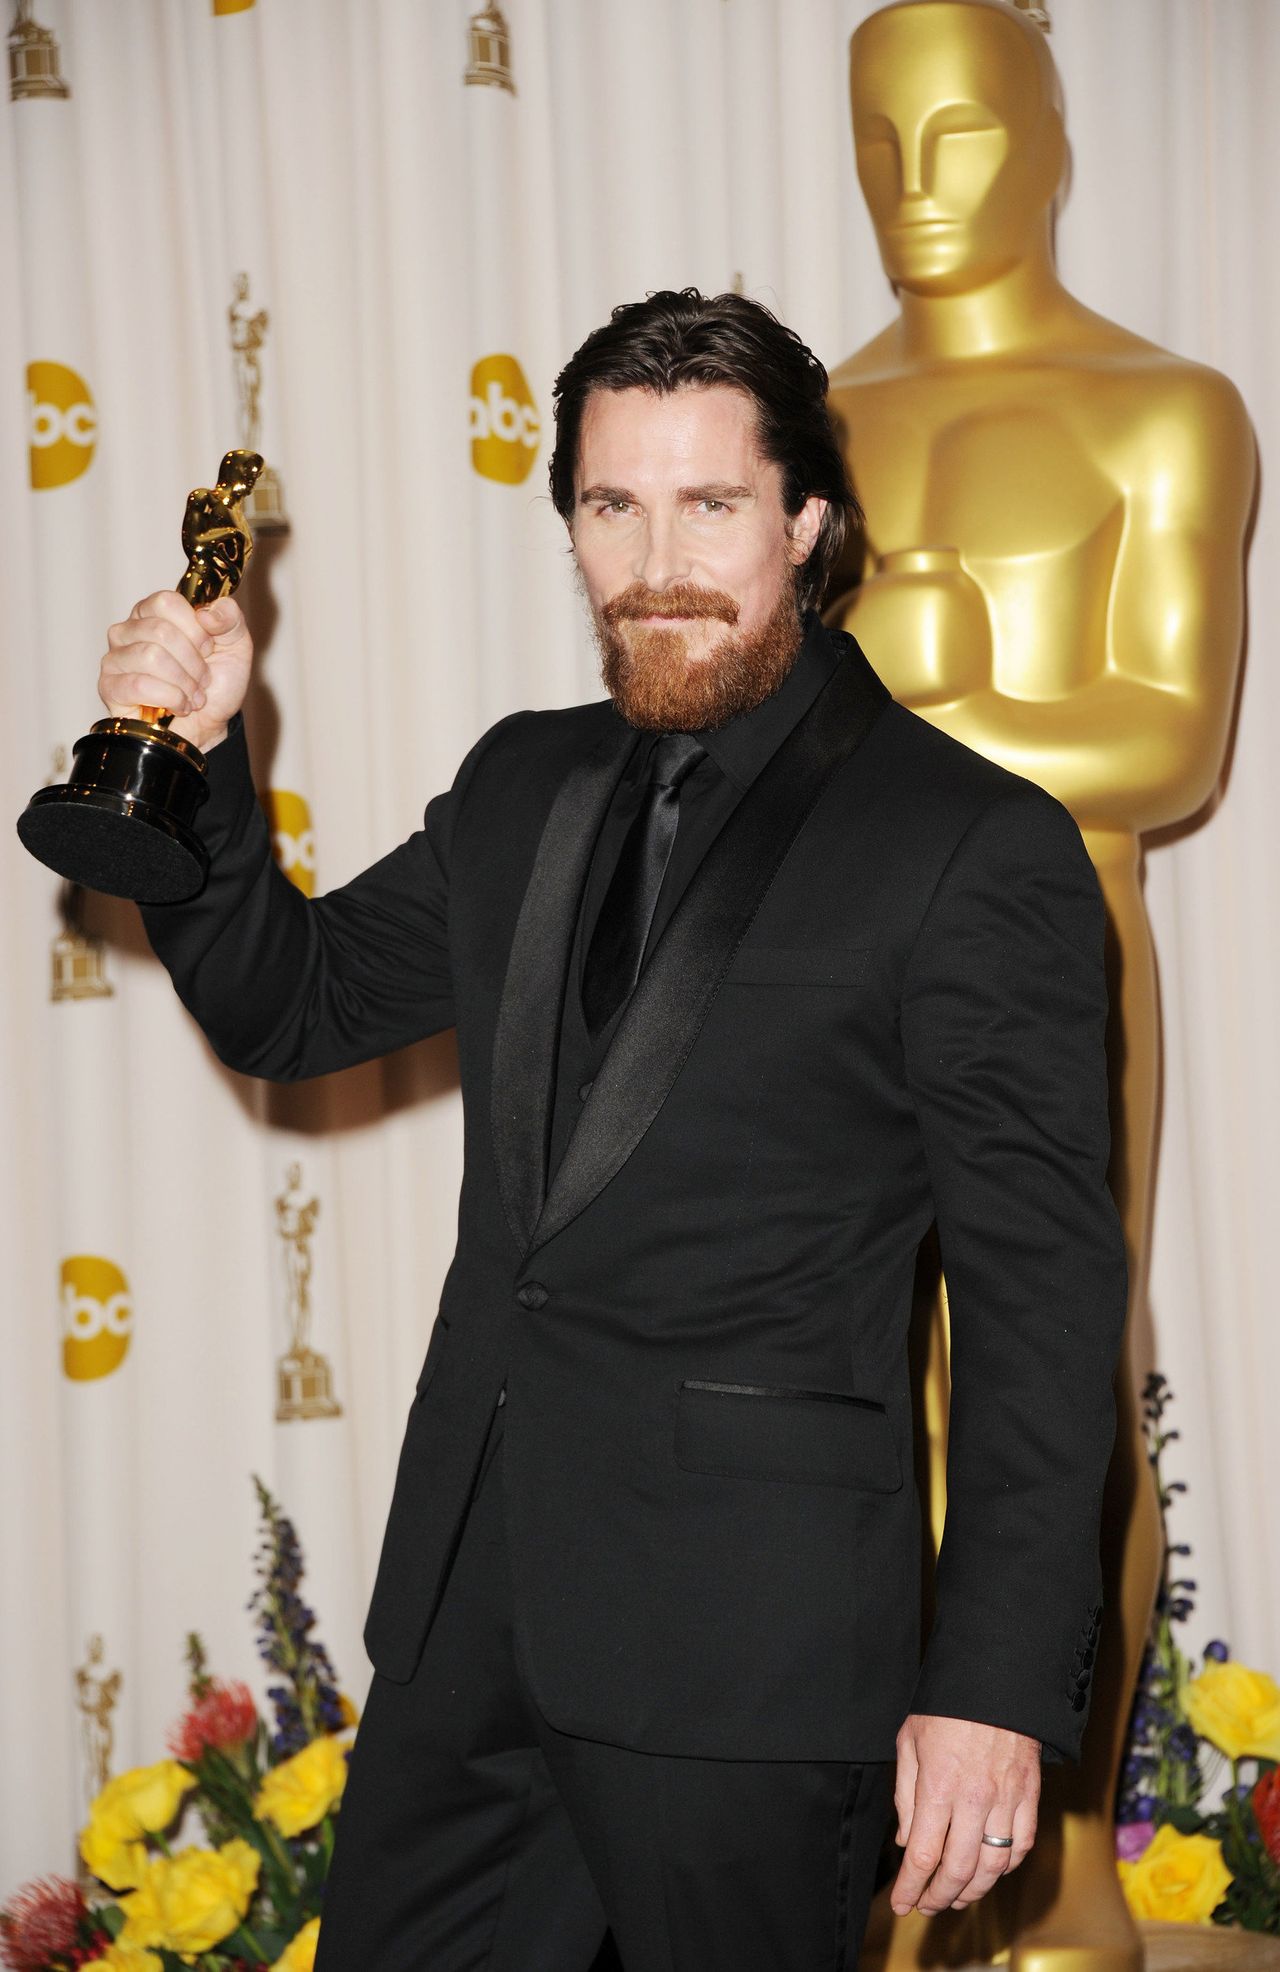 Christian Bale holds his Oscar statue after winning for his role in The Fighter.